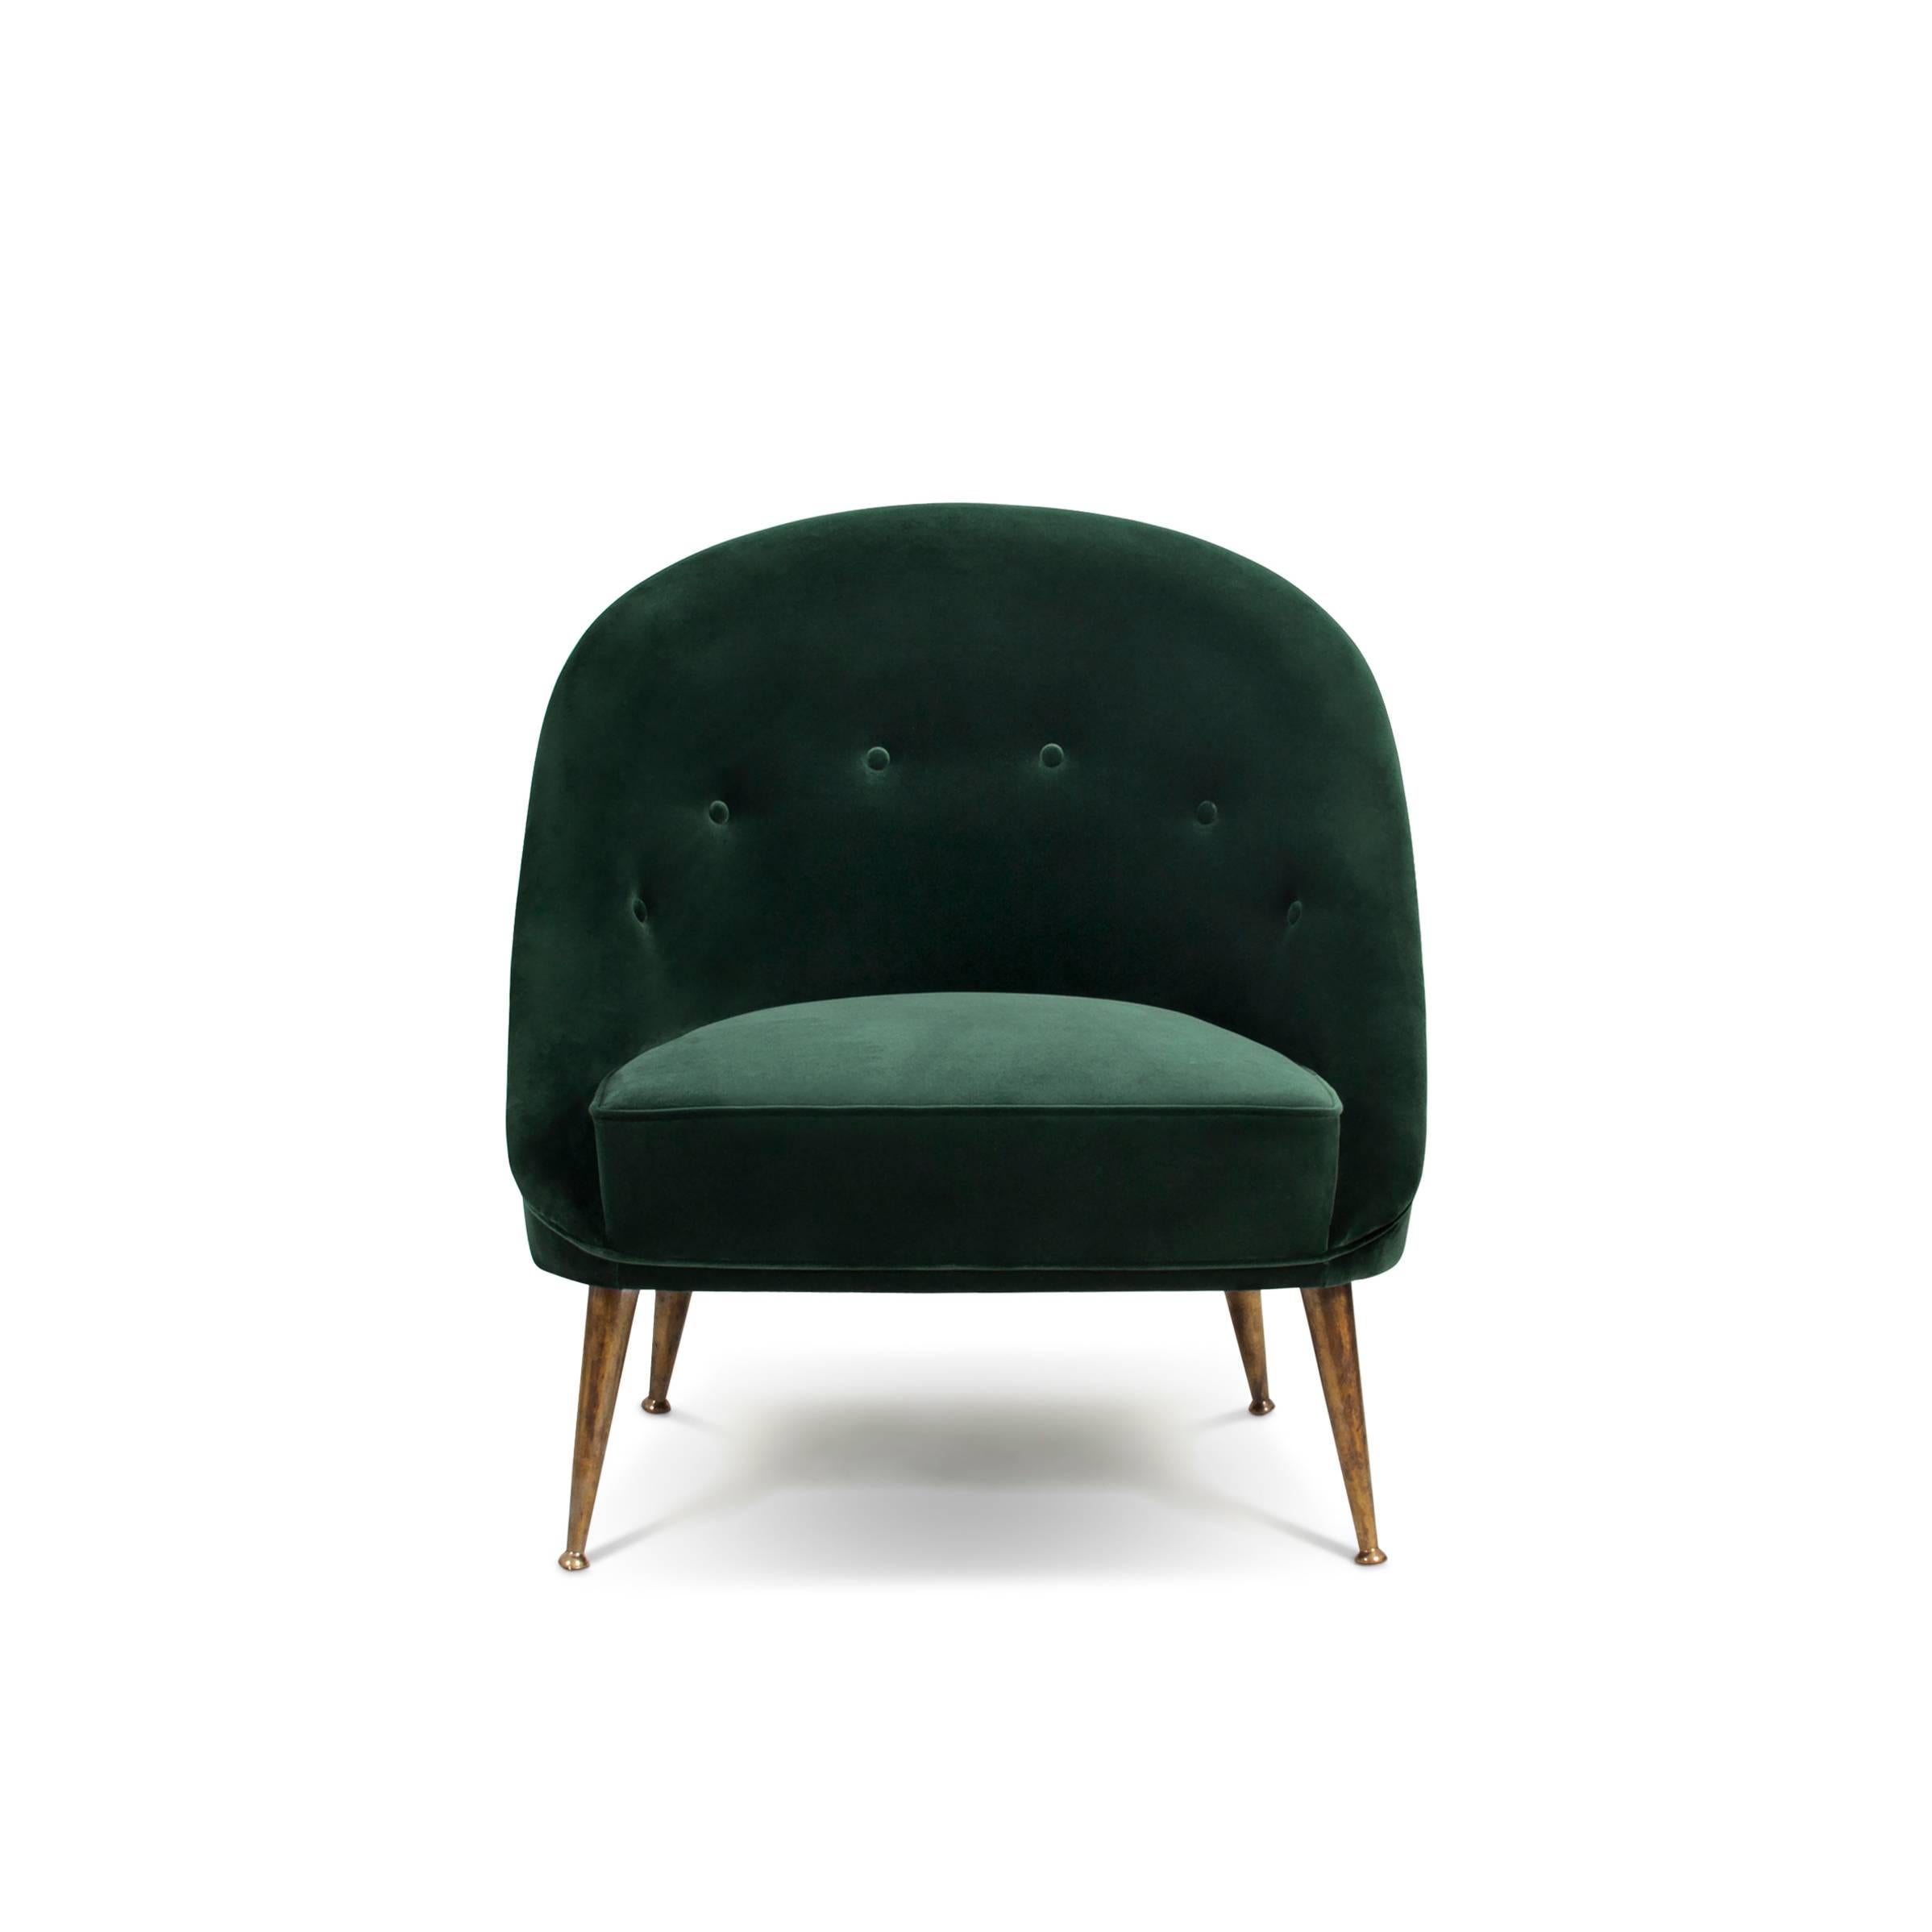 Armchair smart with cotton velvet fabric
and matte aged brass feet. Also available
with other fabrics on request.
